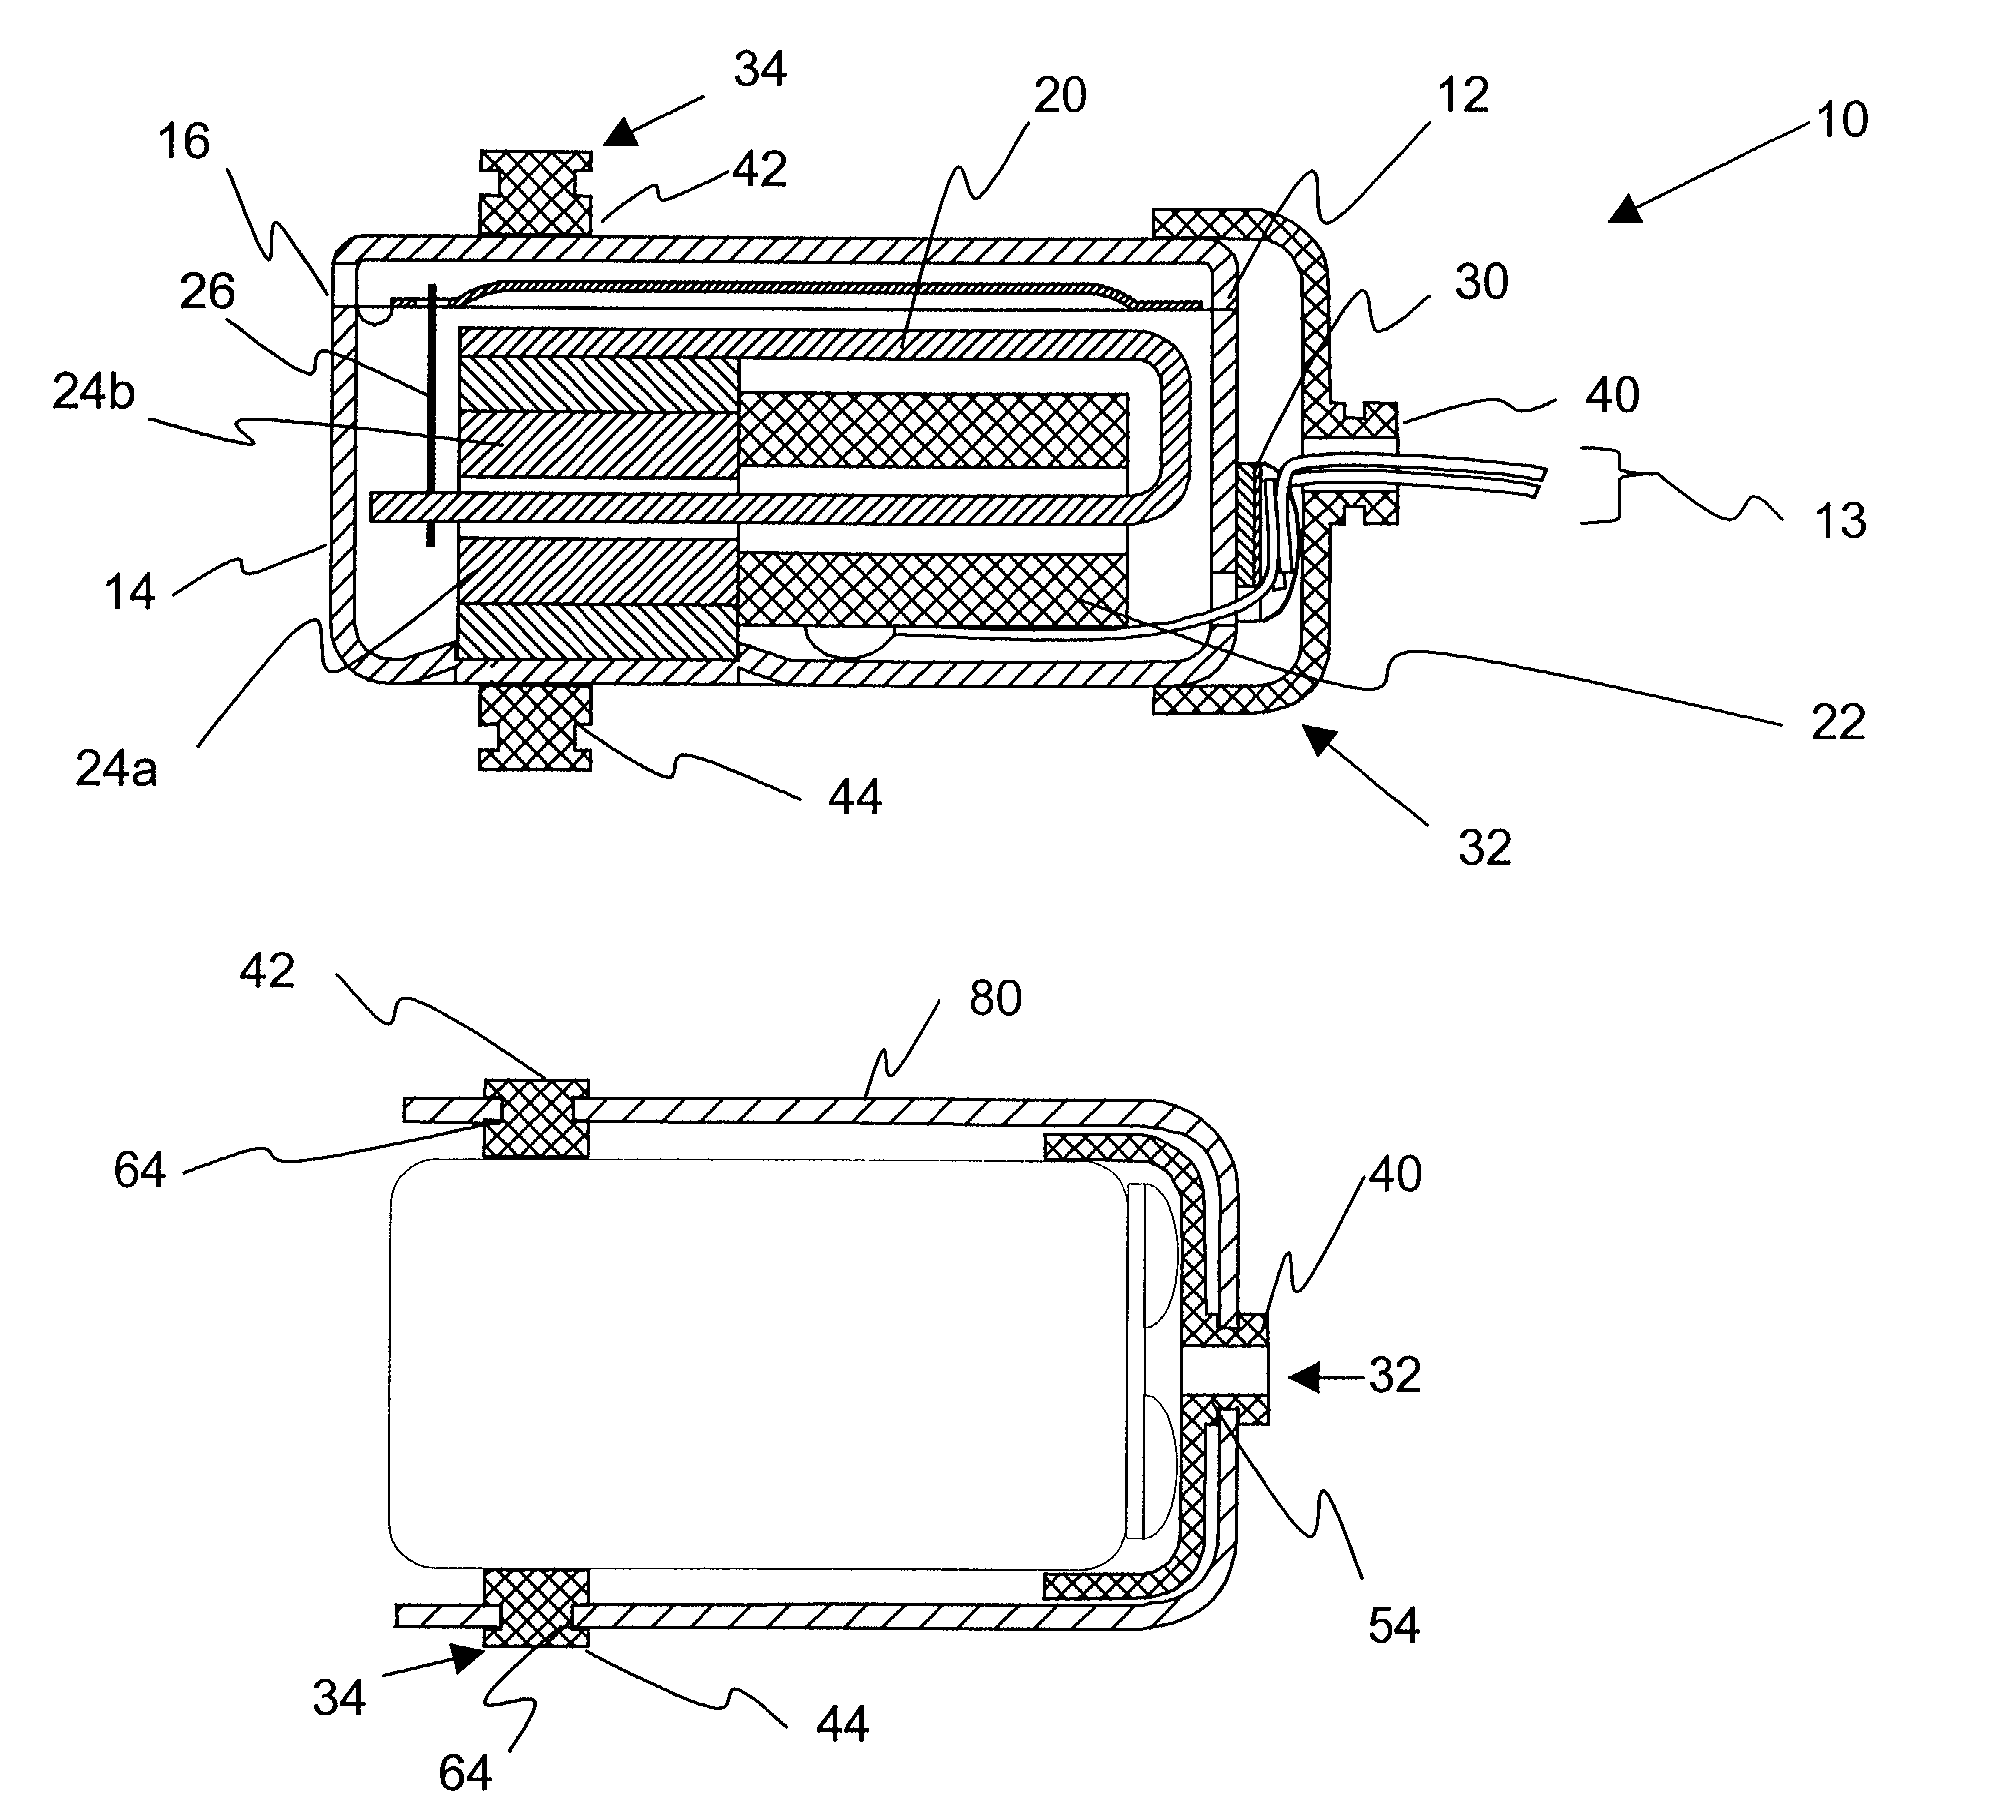 Acoustic receiver having improved mechanical suspension